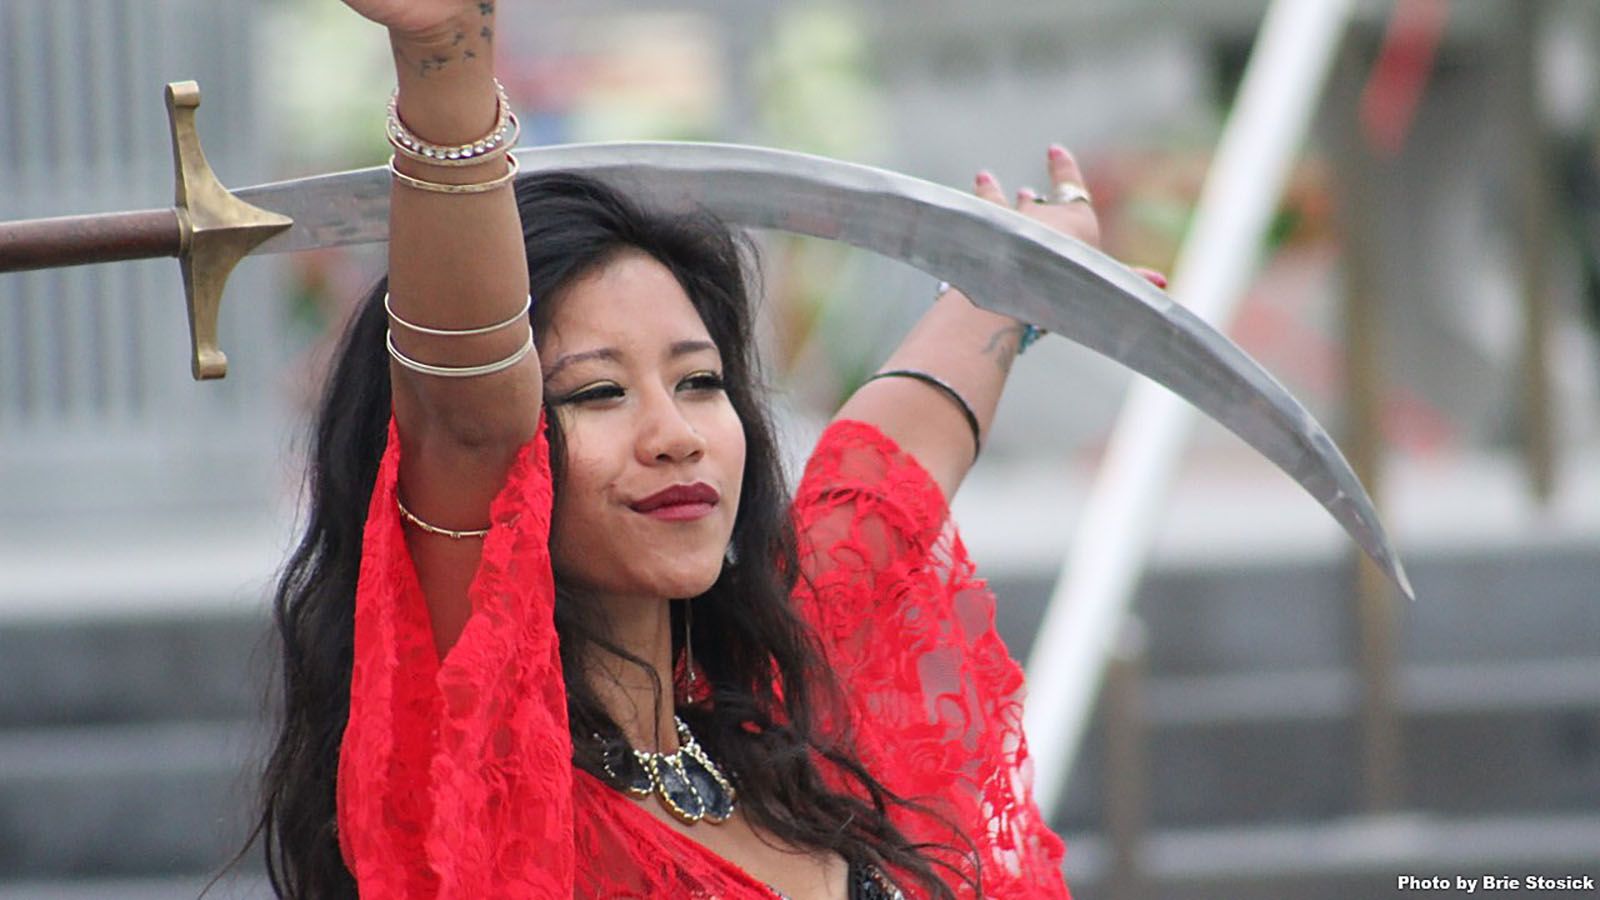 The annual RiverDrums returns to Promenade Park on Tuesday, June 4, to celebrate cultures from around the world.